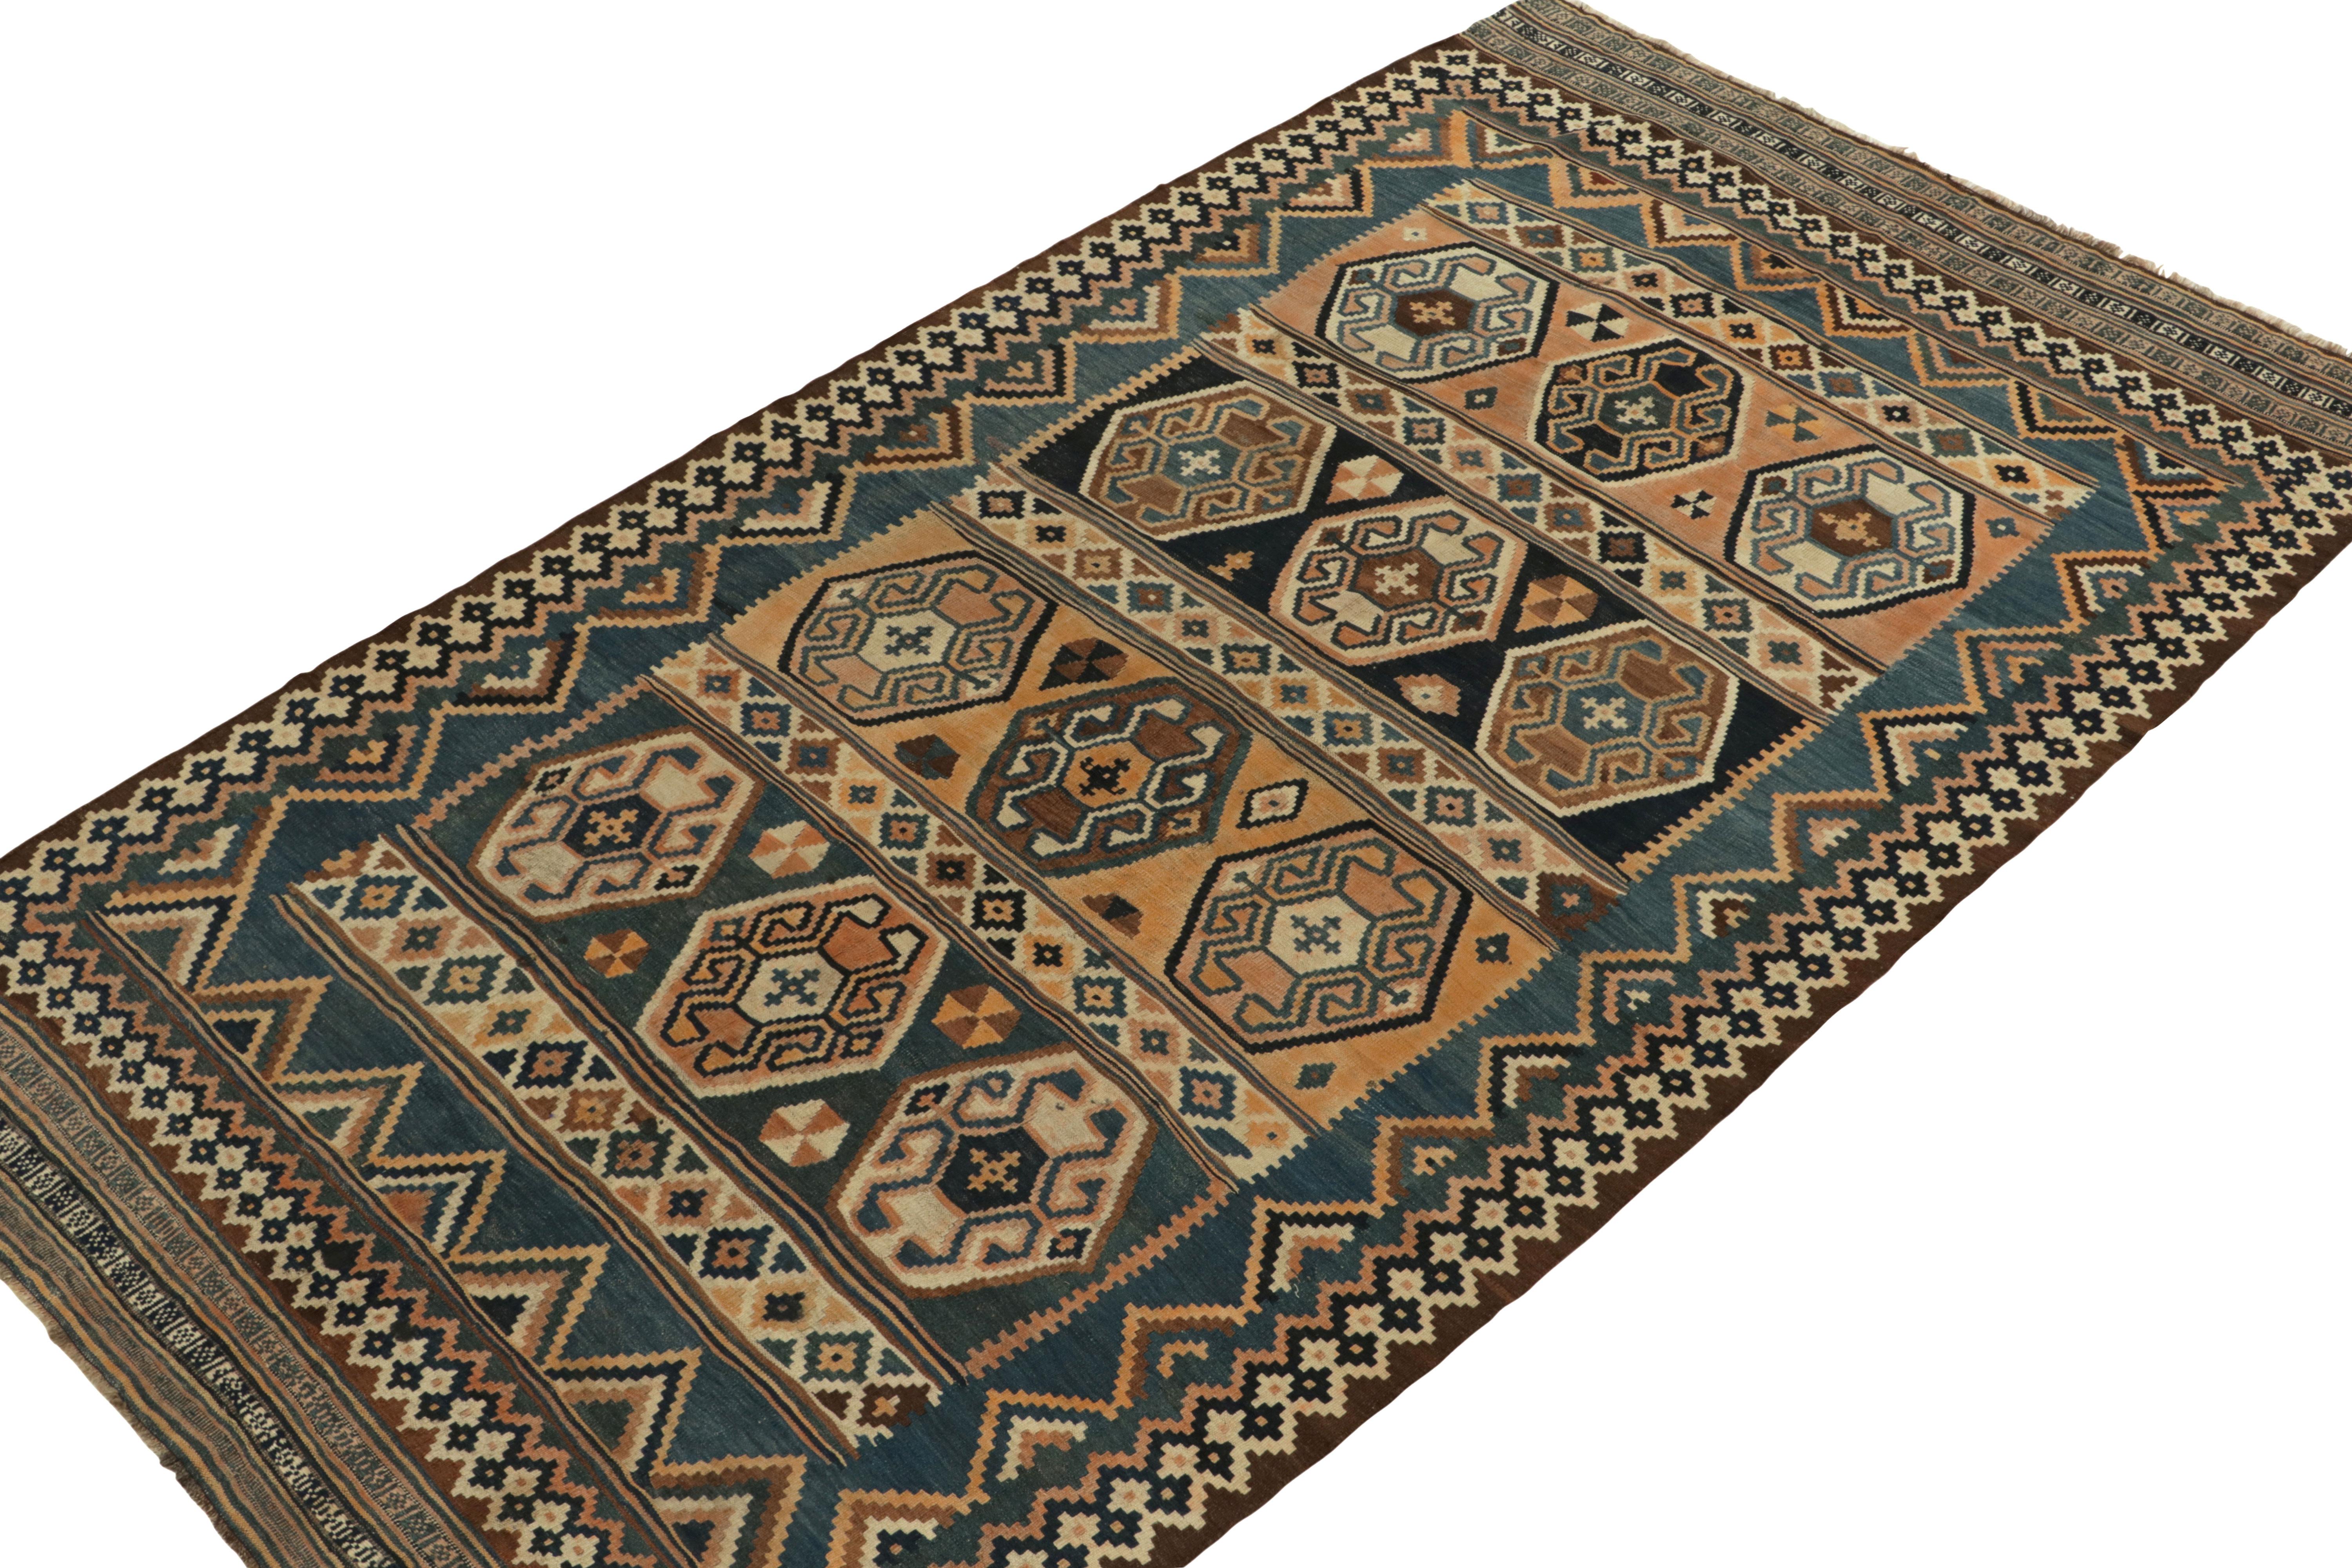 Hailing from Russia circa 1910-1920, an antique Kuba kilim rug - now joining Rug & Kilim’s classic selections. 

This exemplary Caucasian flat weave revels in handsome variation of tones of blue, brown & beige in the gul motifs & allied geometric